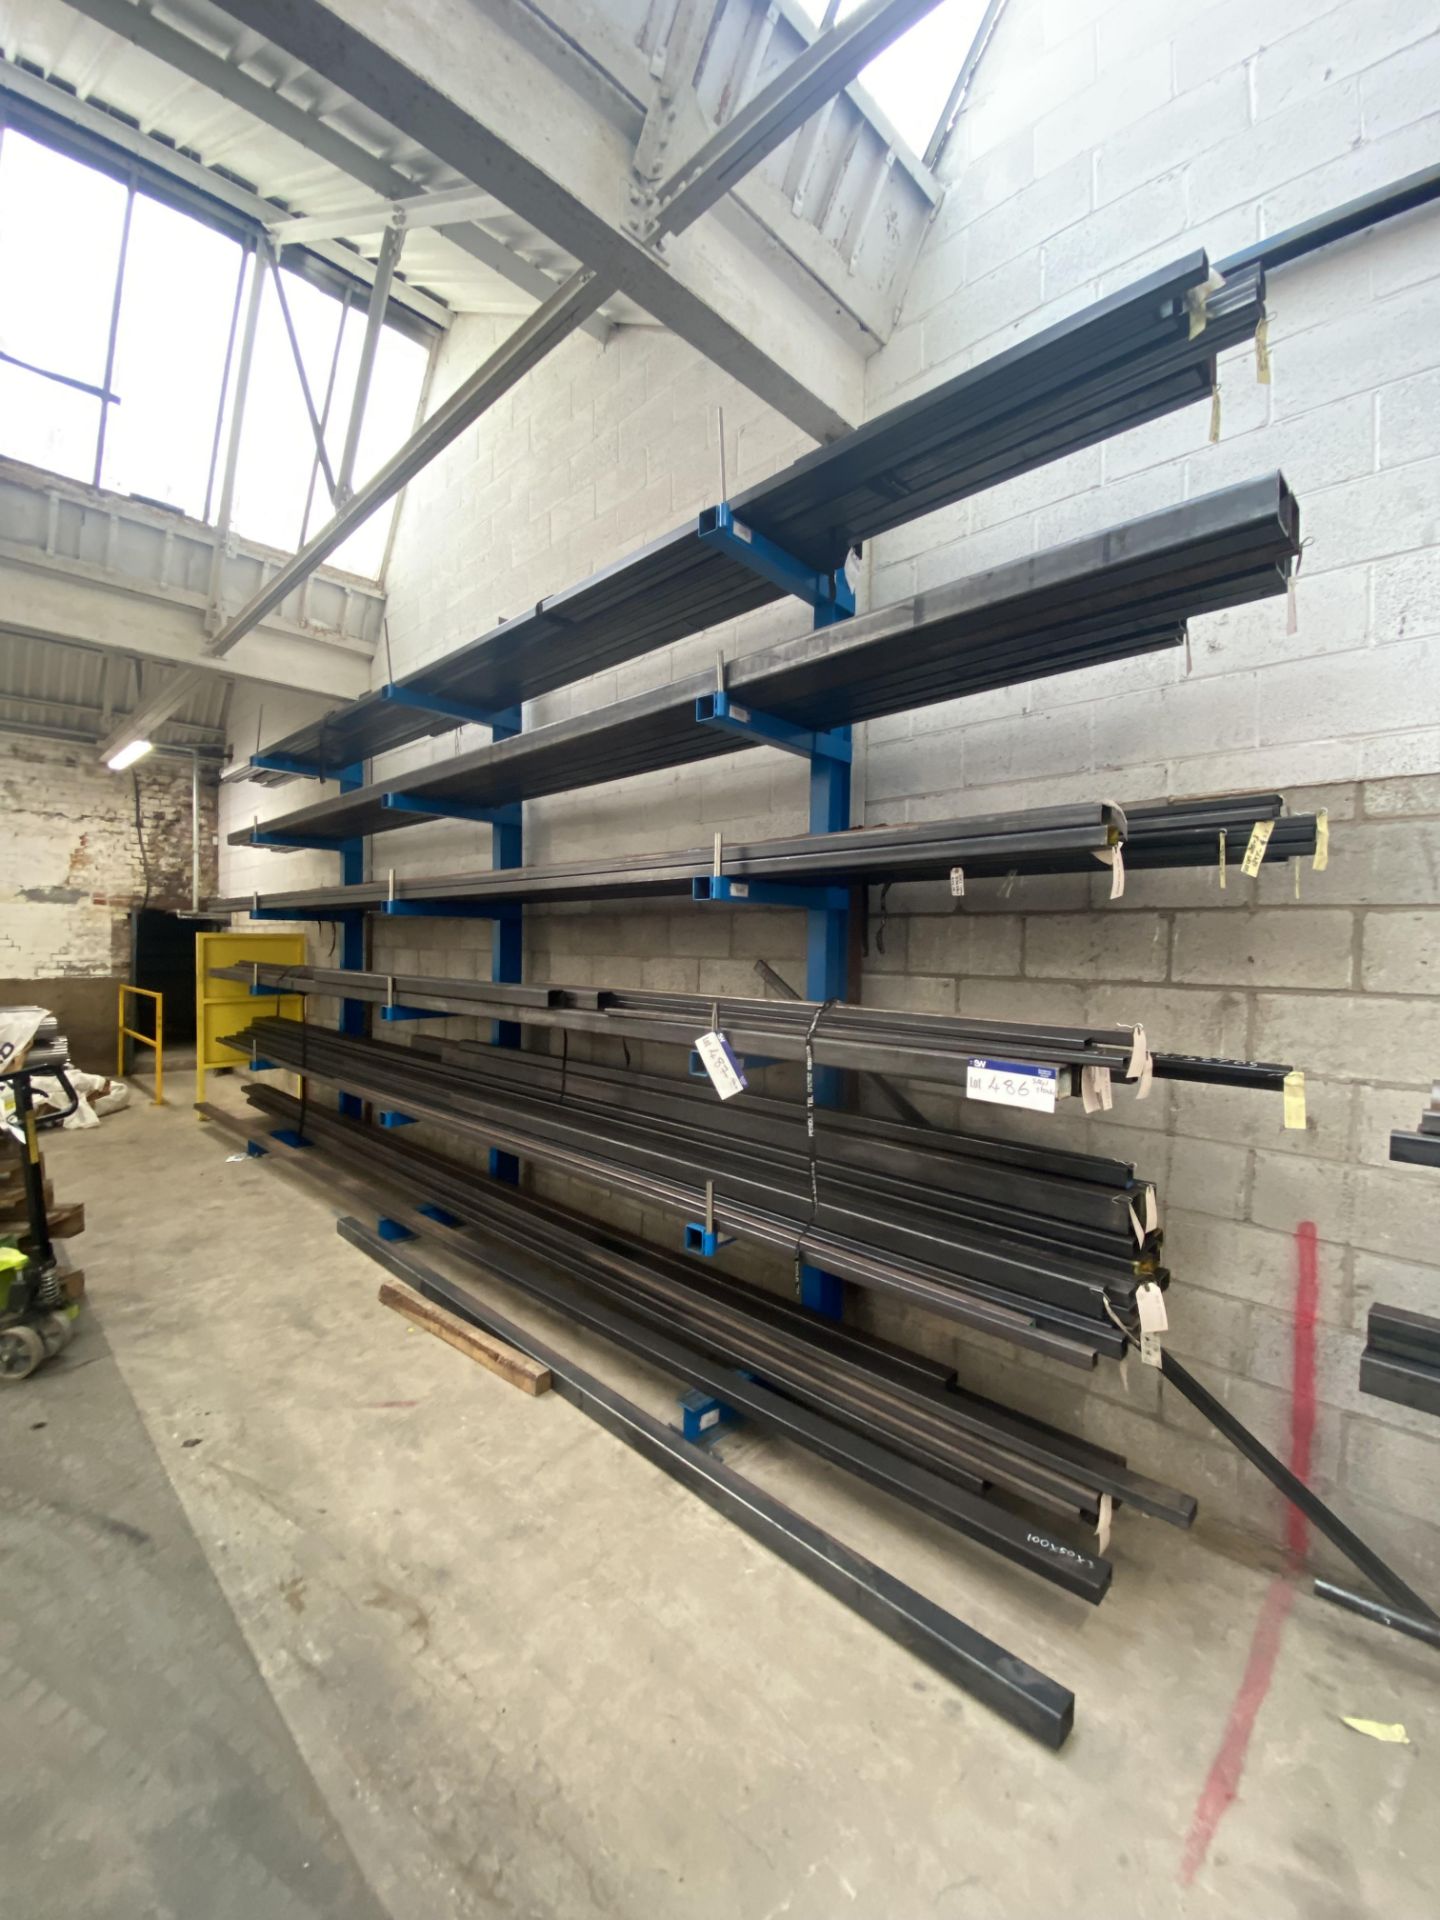 Six Tier Three Section Single Sided Stock Rack, currently 5m x approx. 900mm x 3.5m high (contents